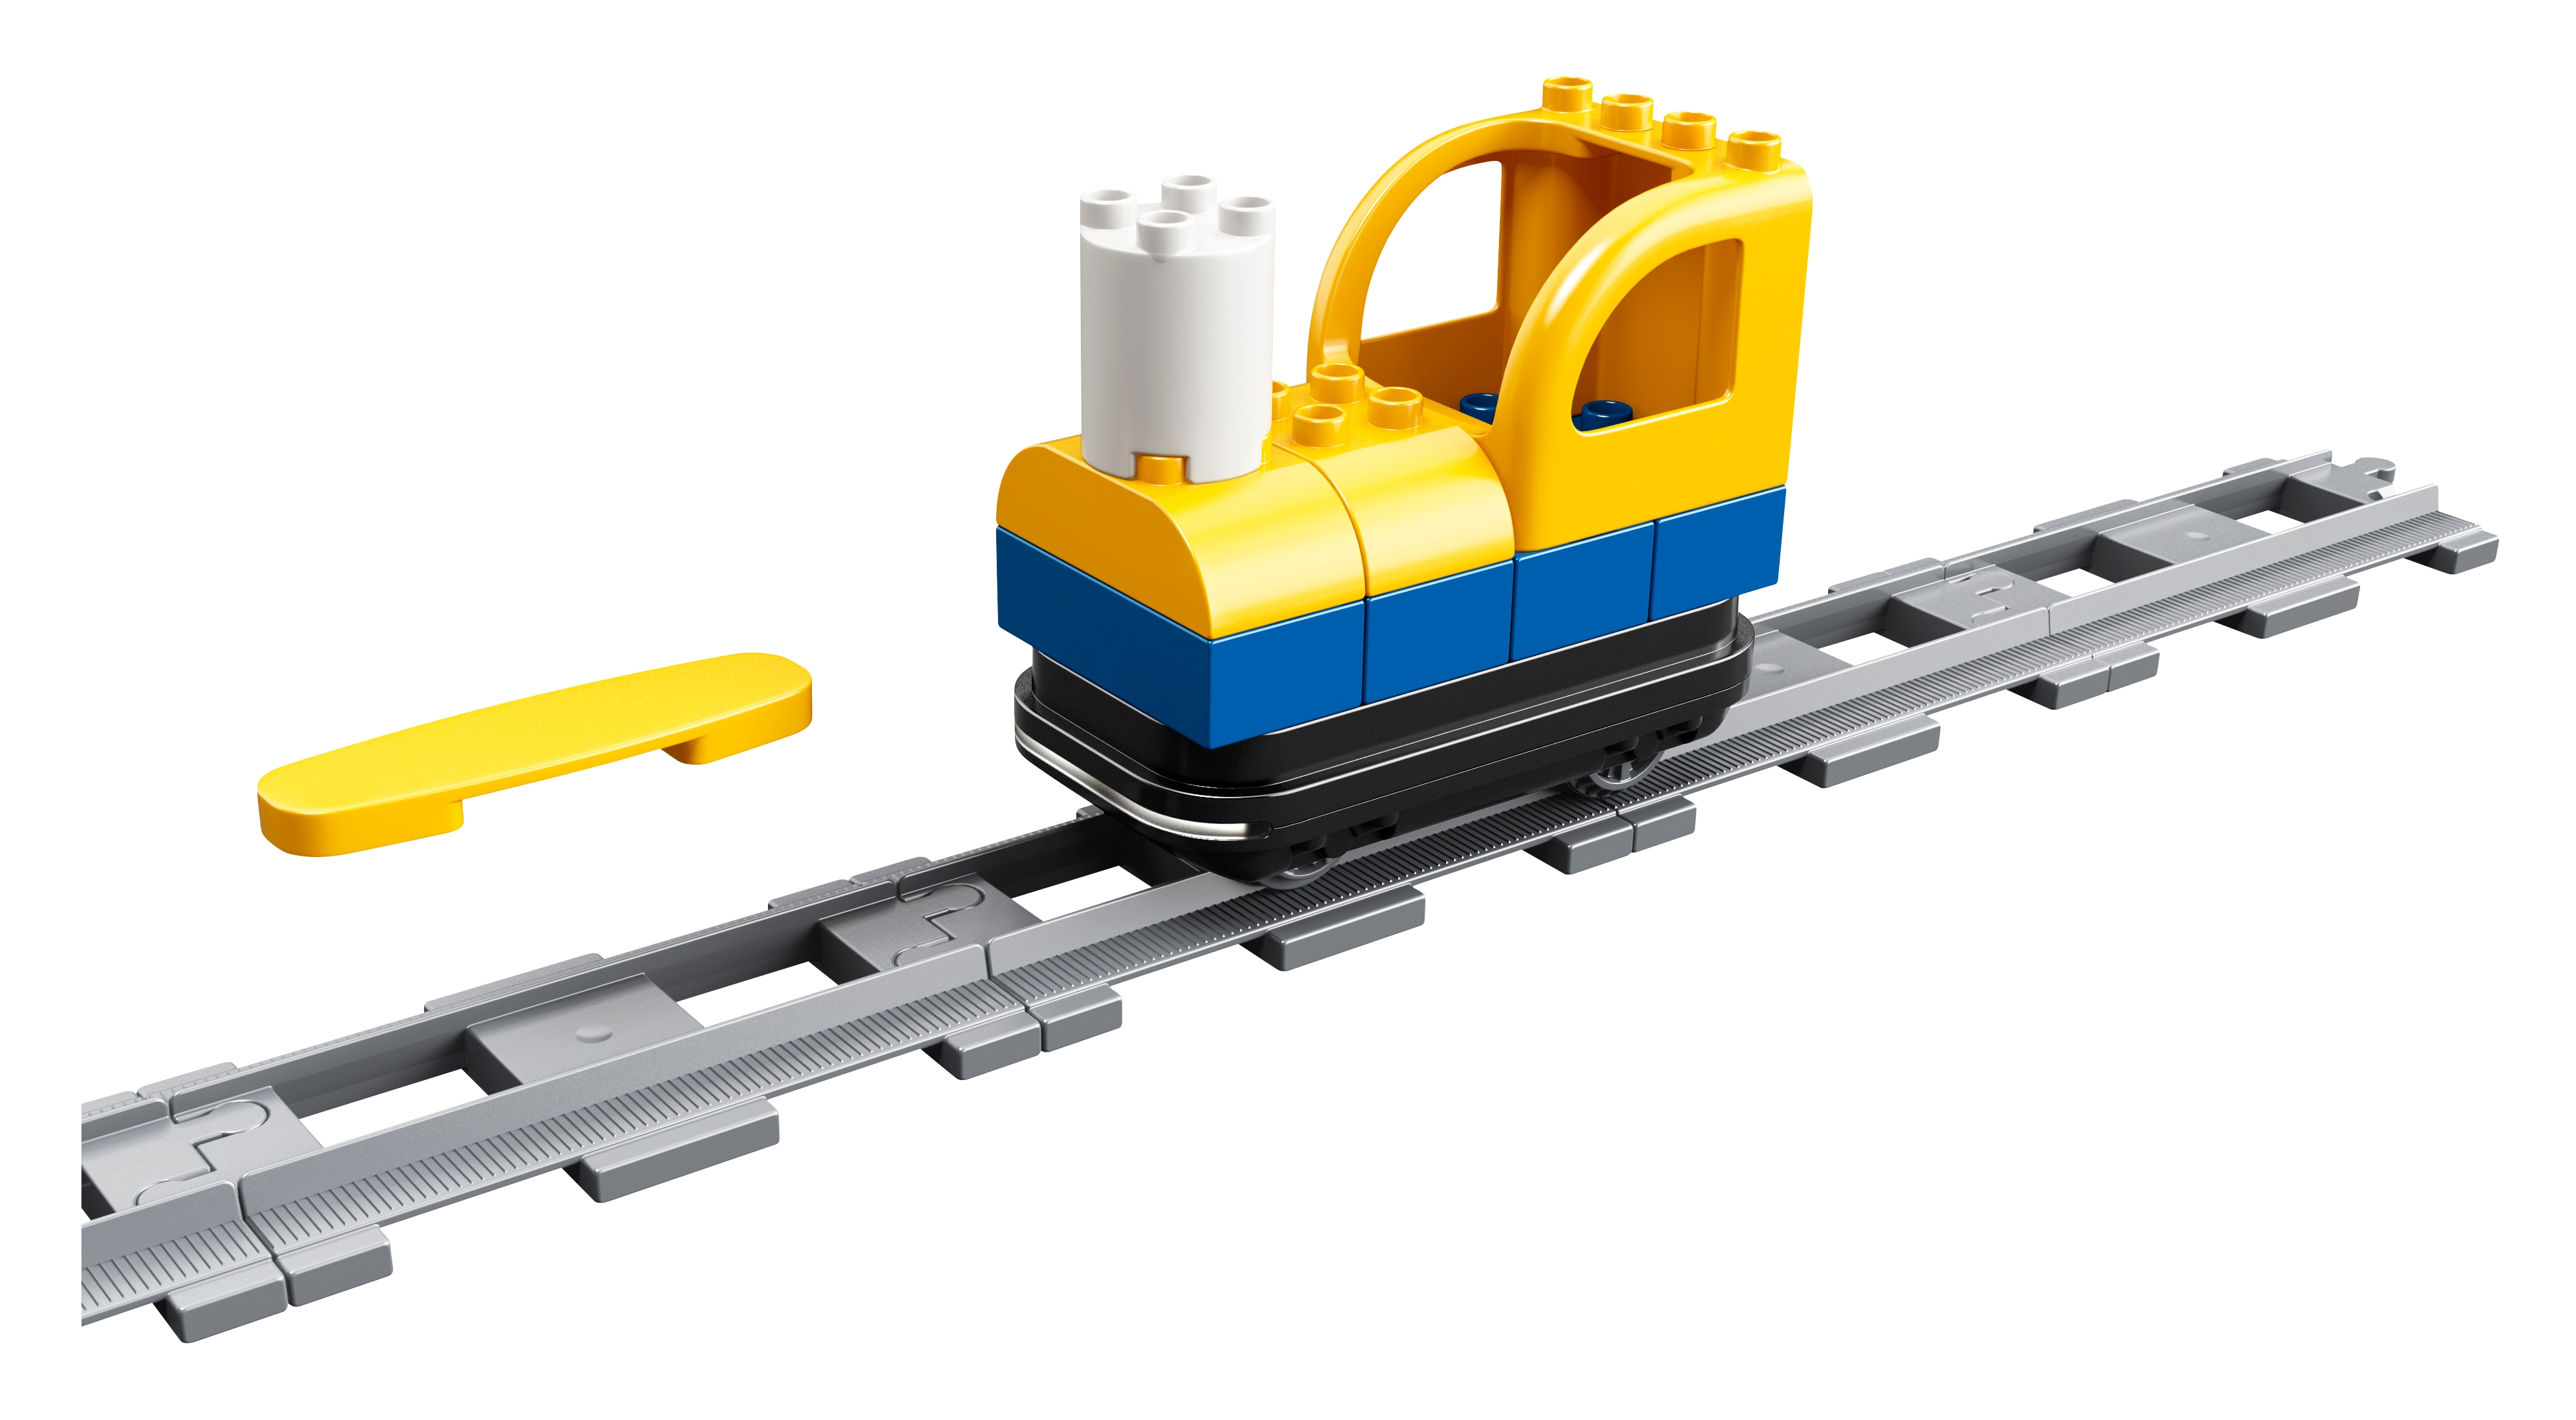 Coding Express 45025 | DUPLO® | Buy online at the Official LEGO